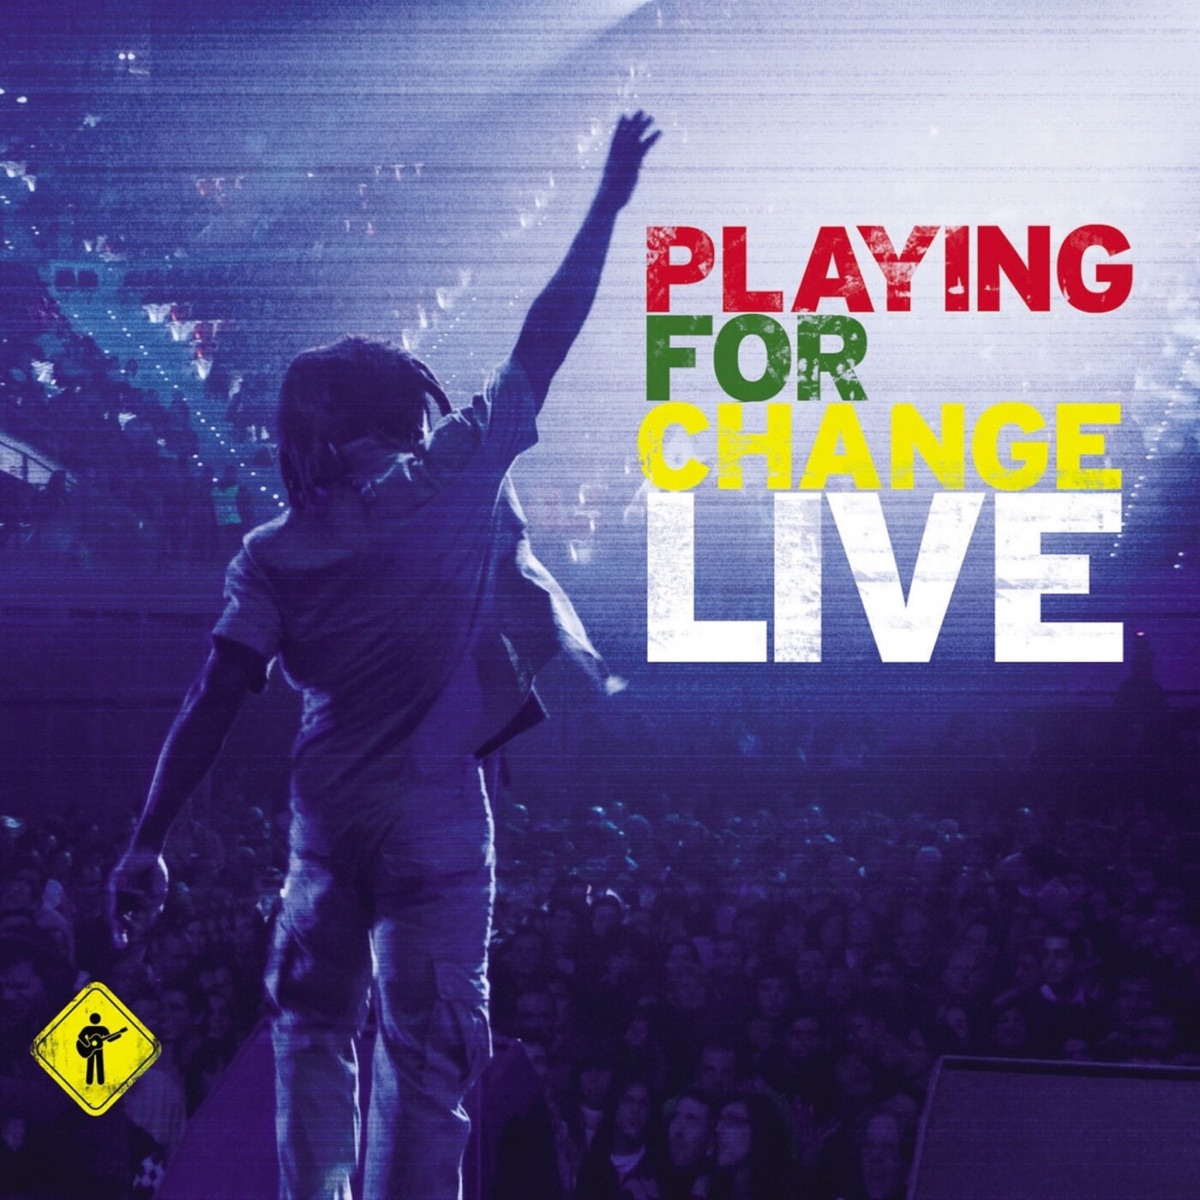 Listen to the Music - Album by Playing For Change